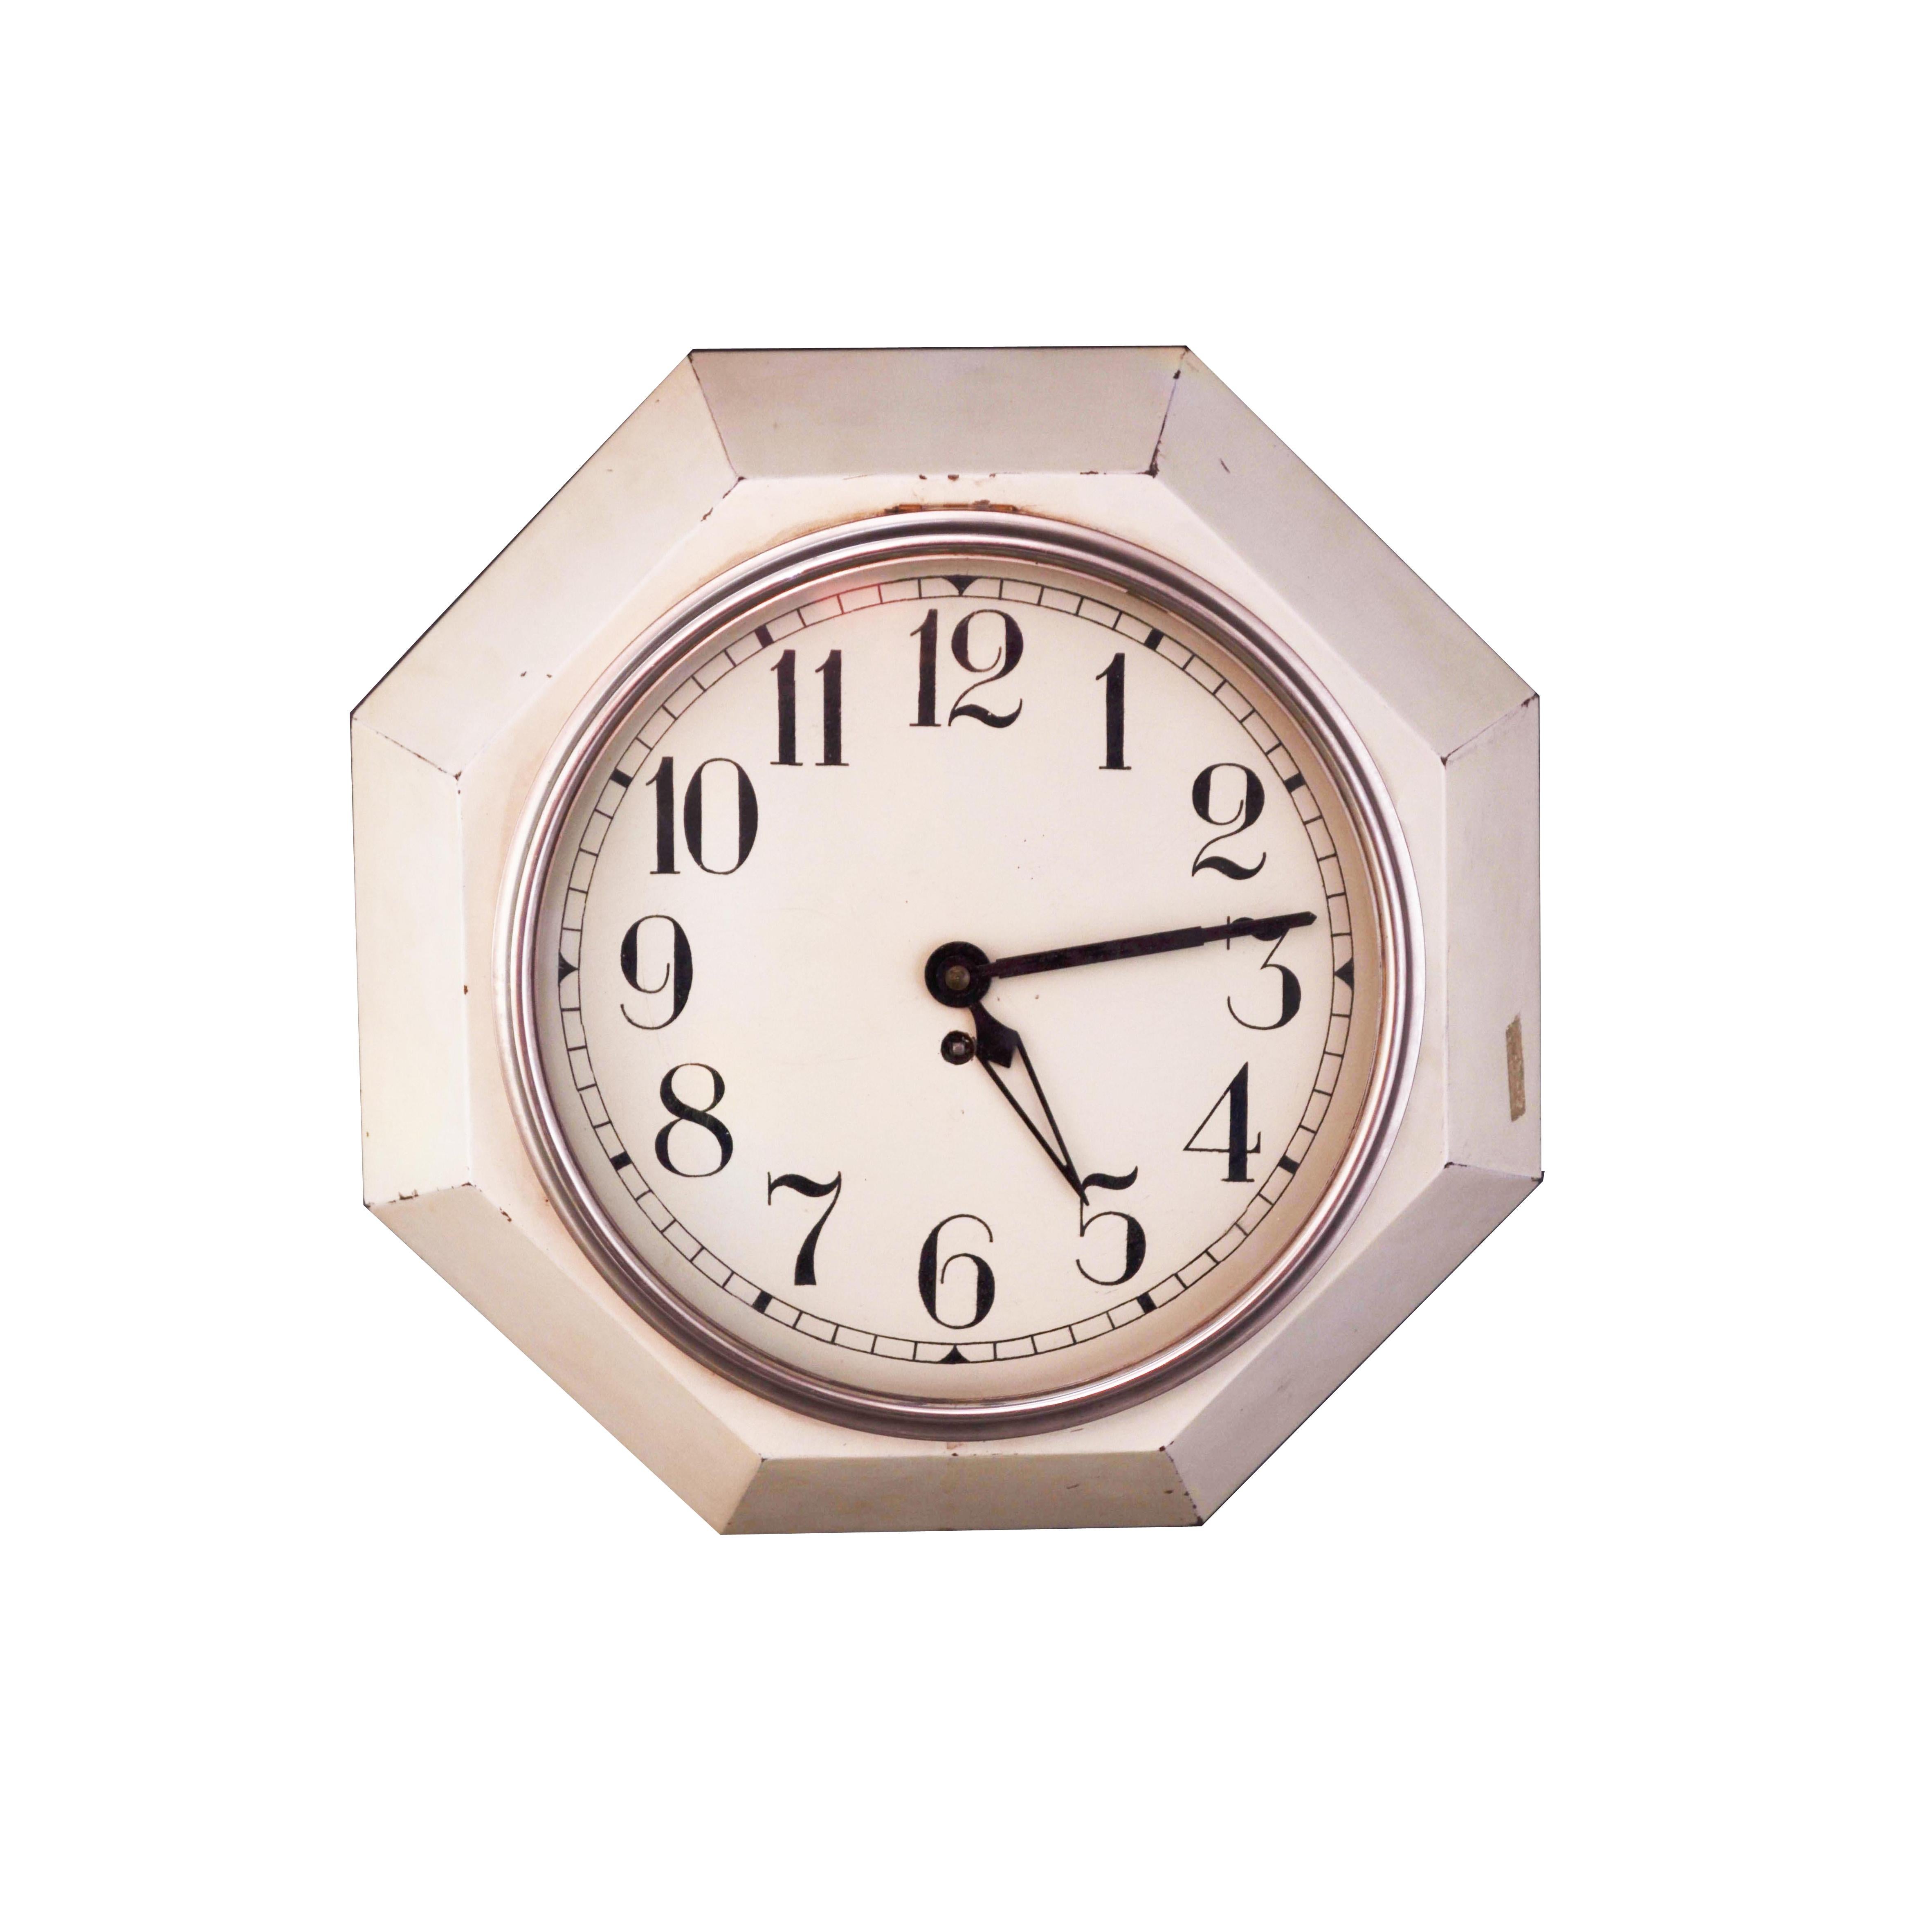 Austrian Original Art Deco Wall Clock by Adolf Loos Early 20th Century, Functioning For Sale